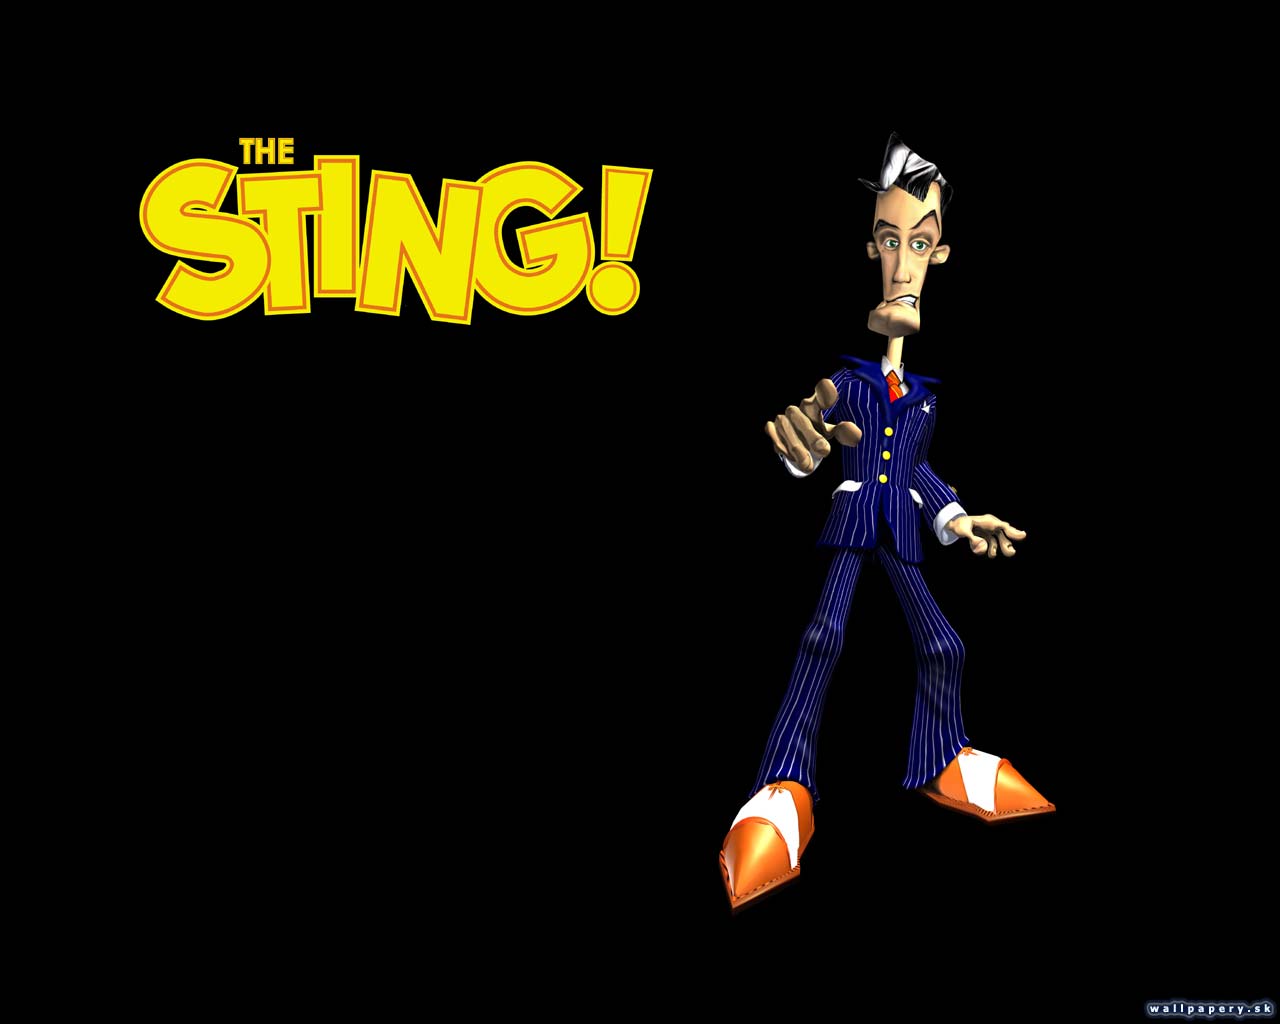 The Sting! - wallpaper 2